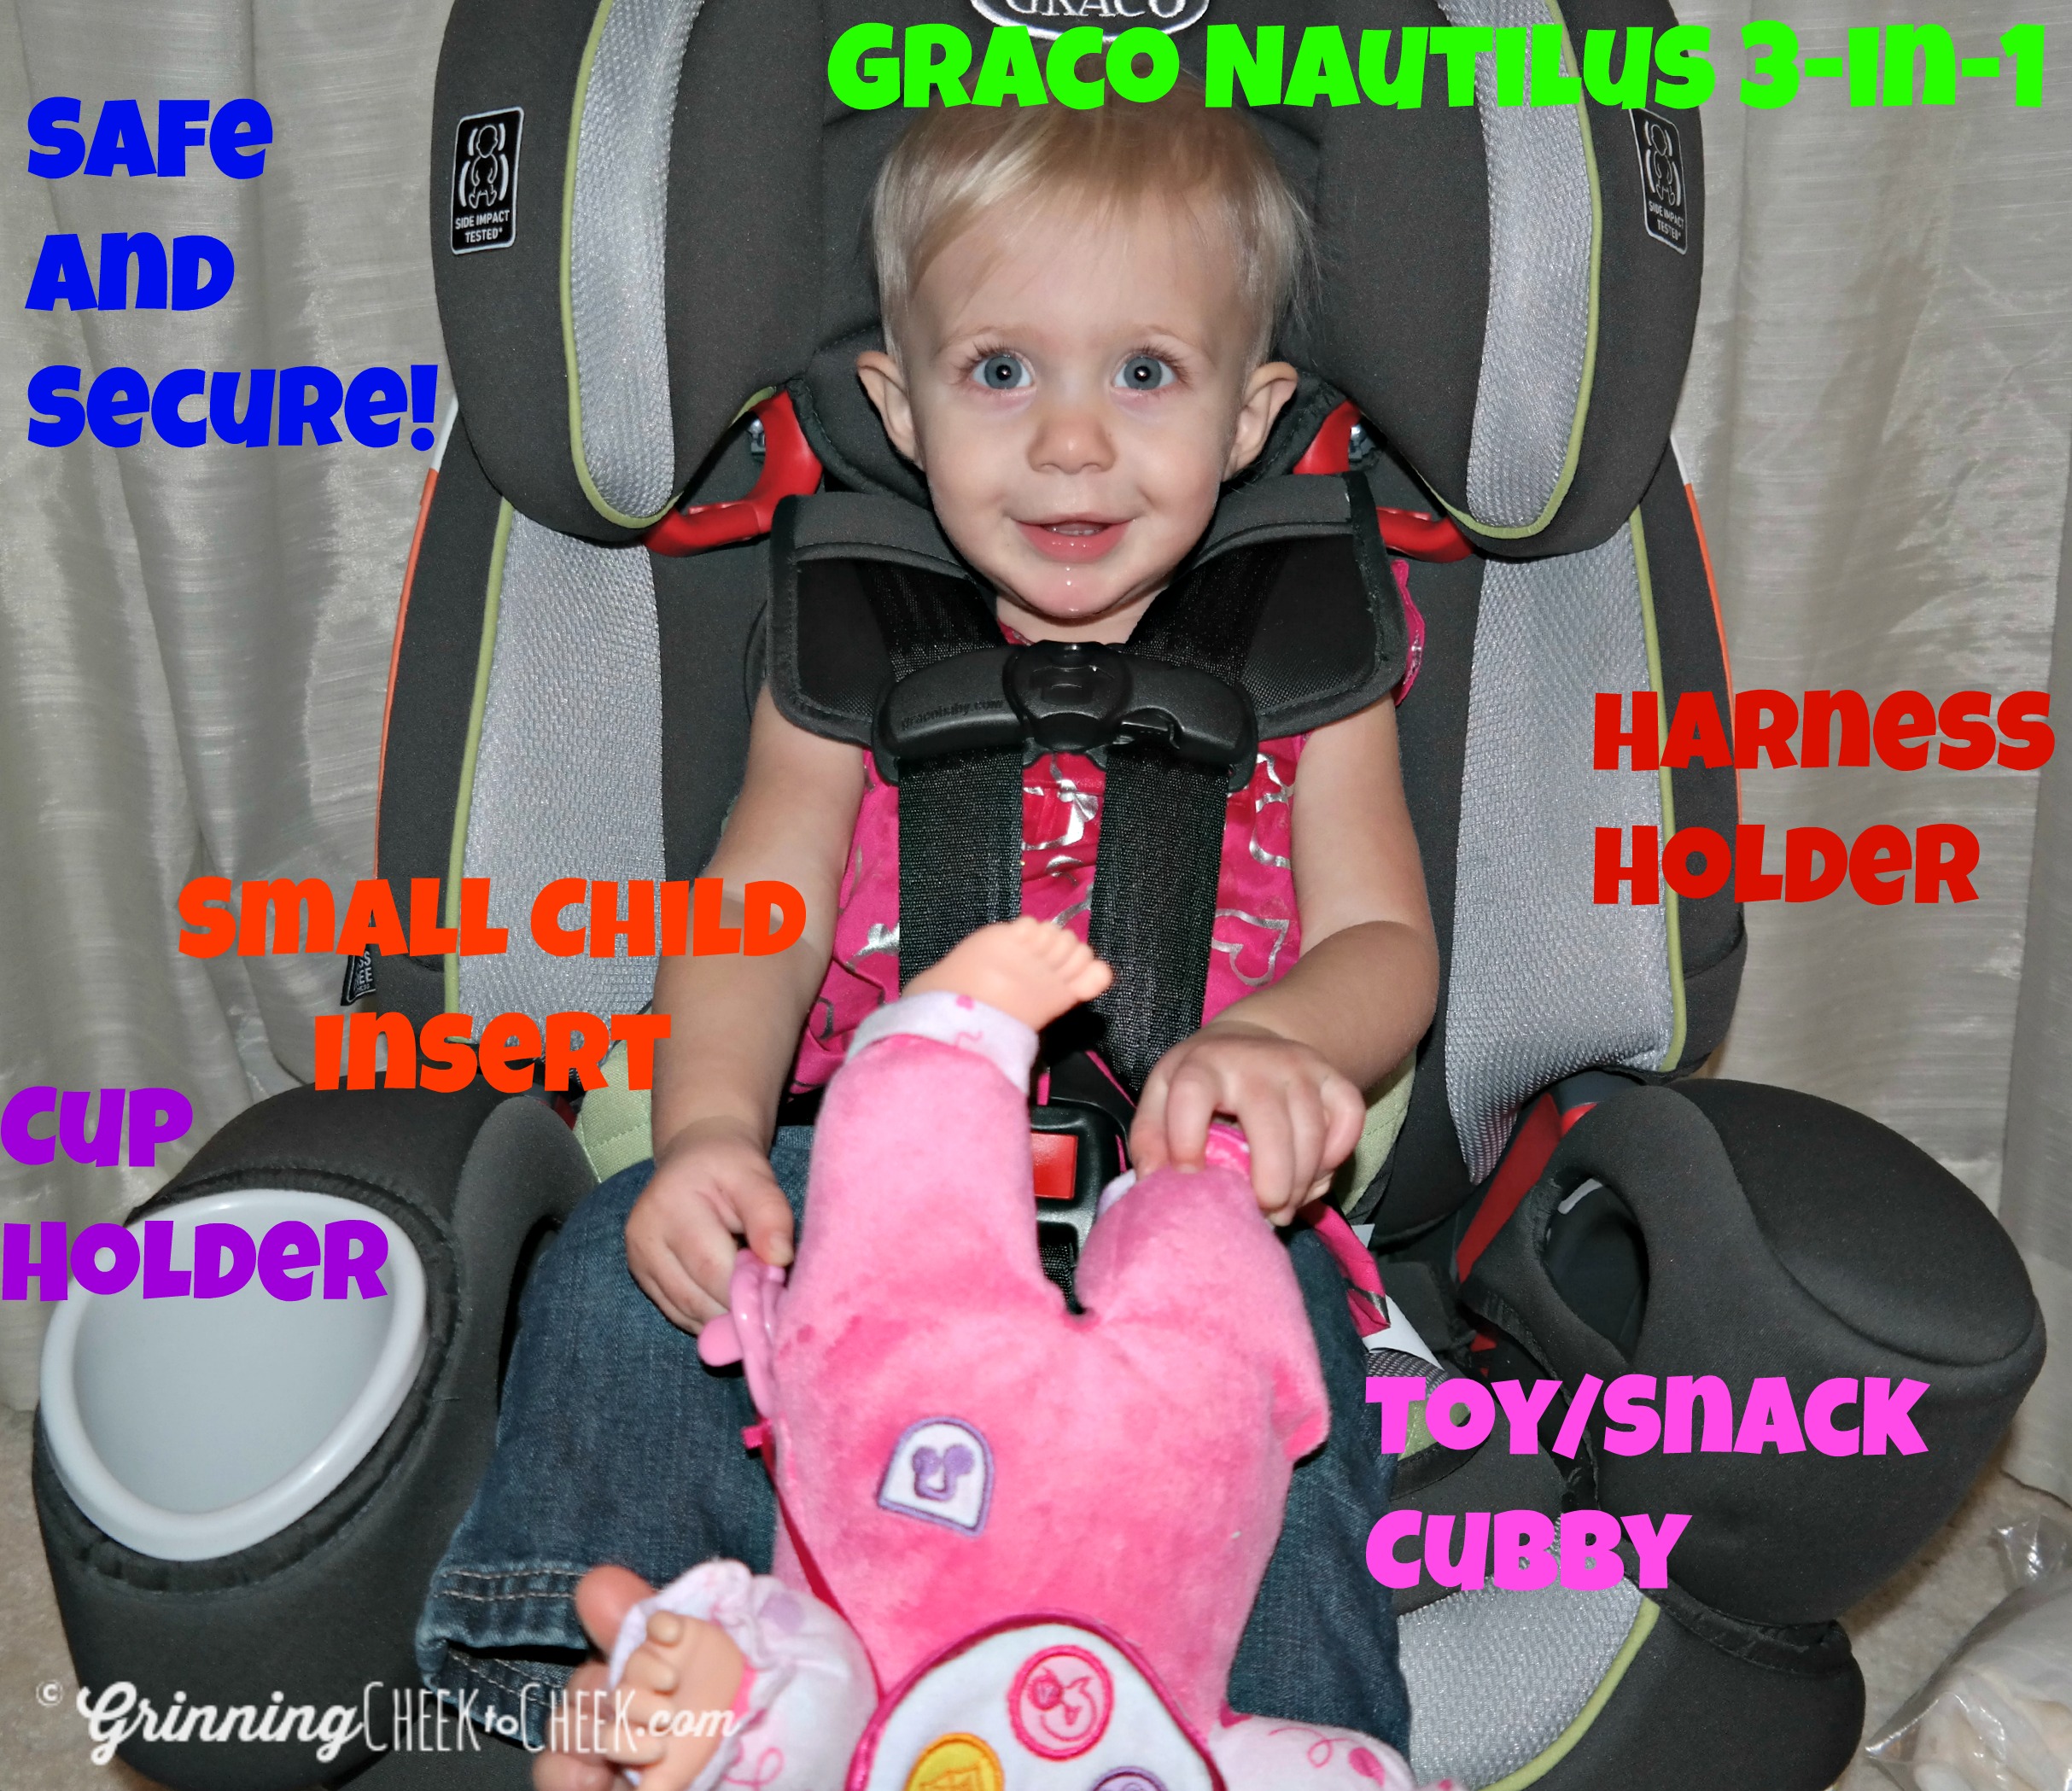 Get To Grandma’s Safely with Graco! #MerryChristmas